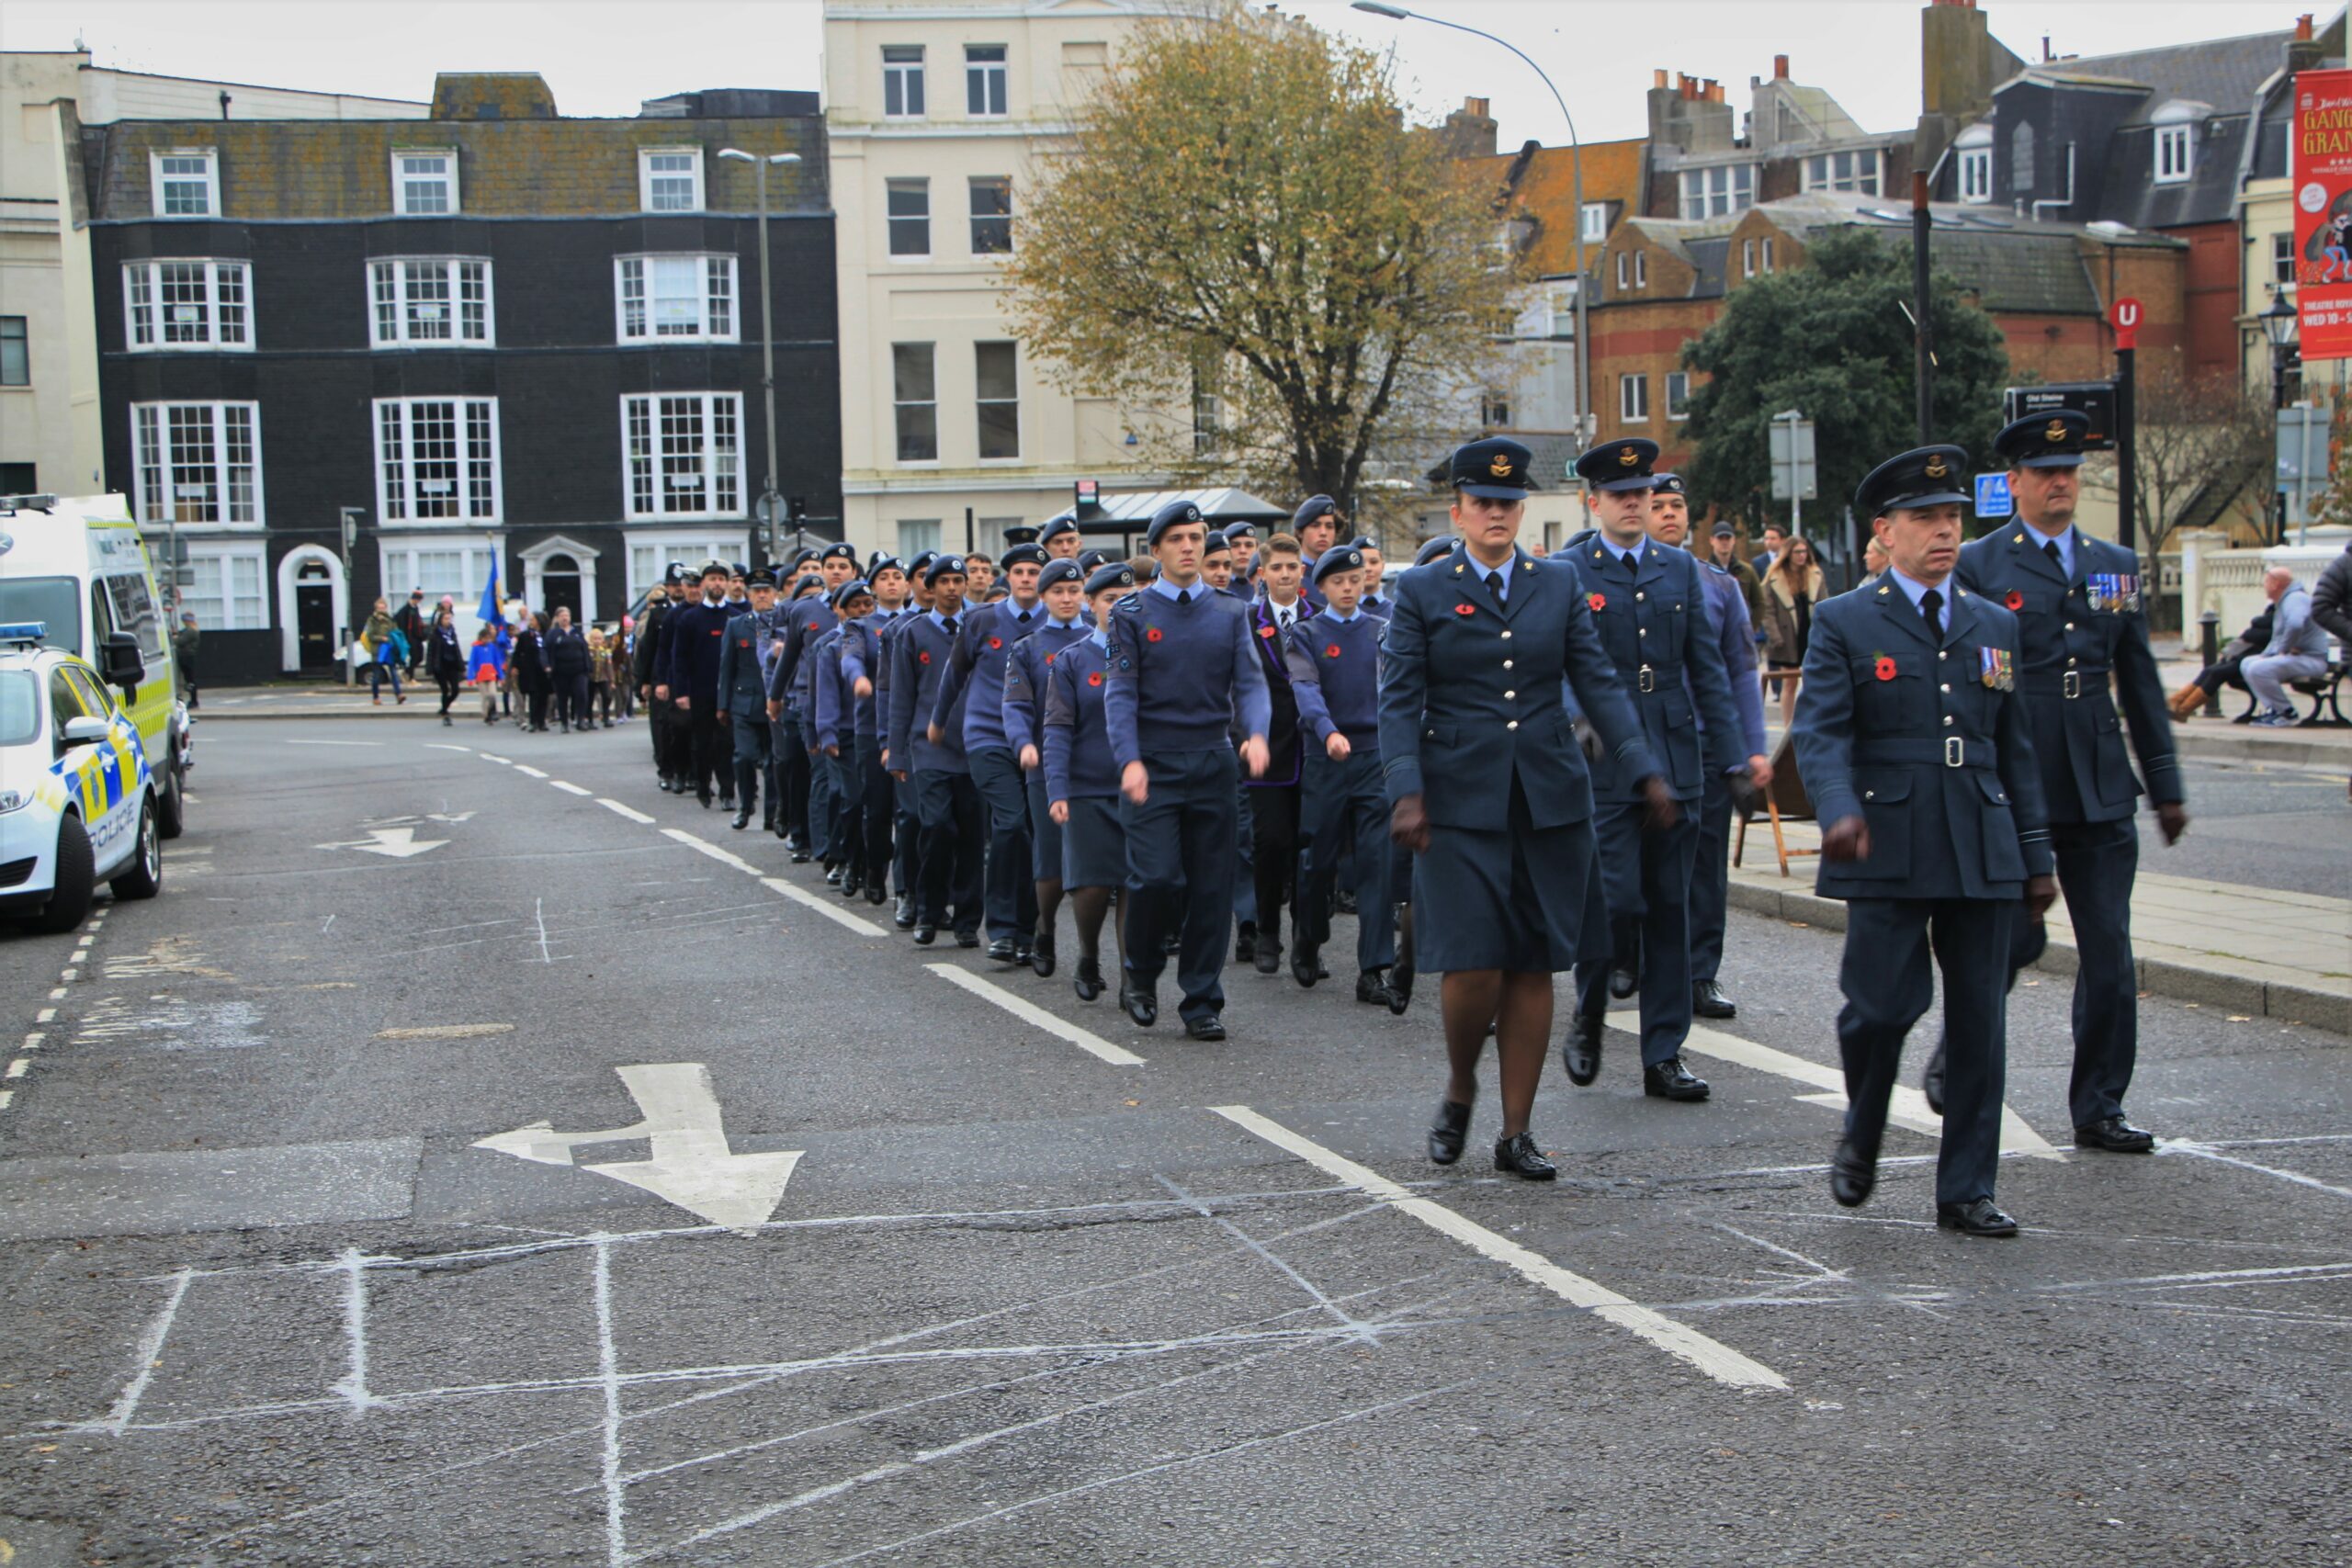 image of RAF march past